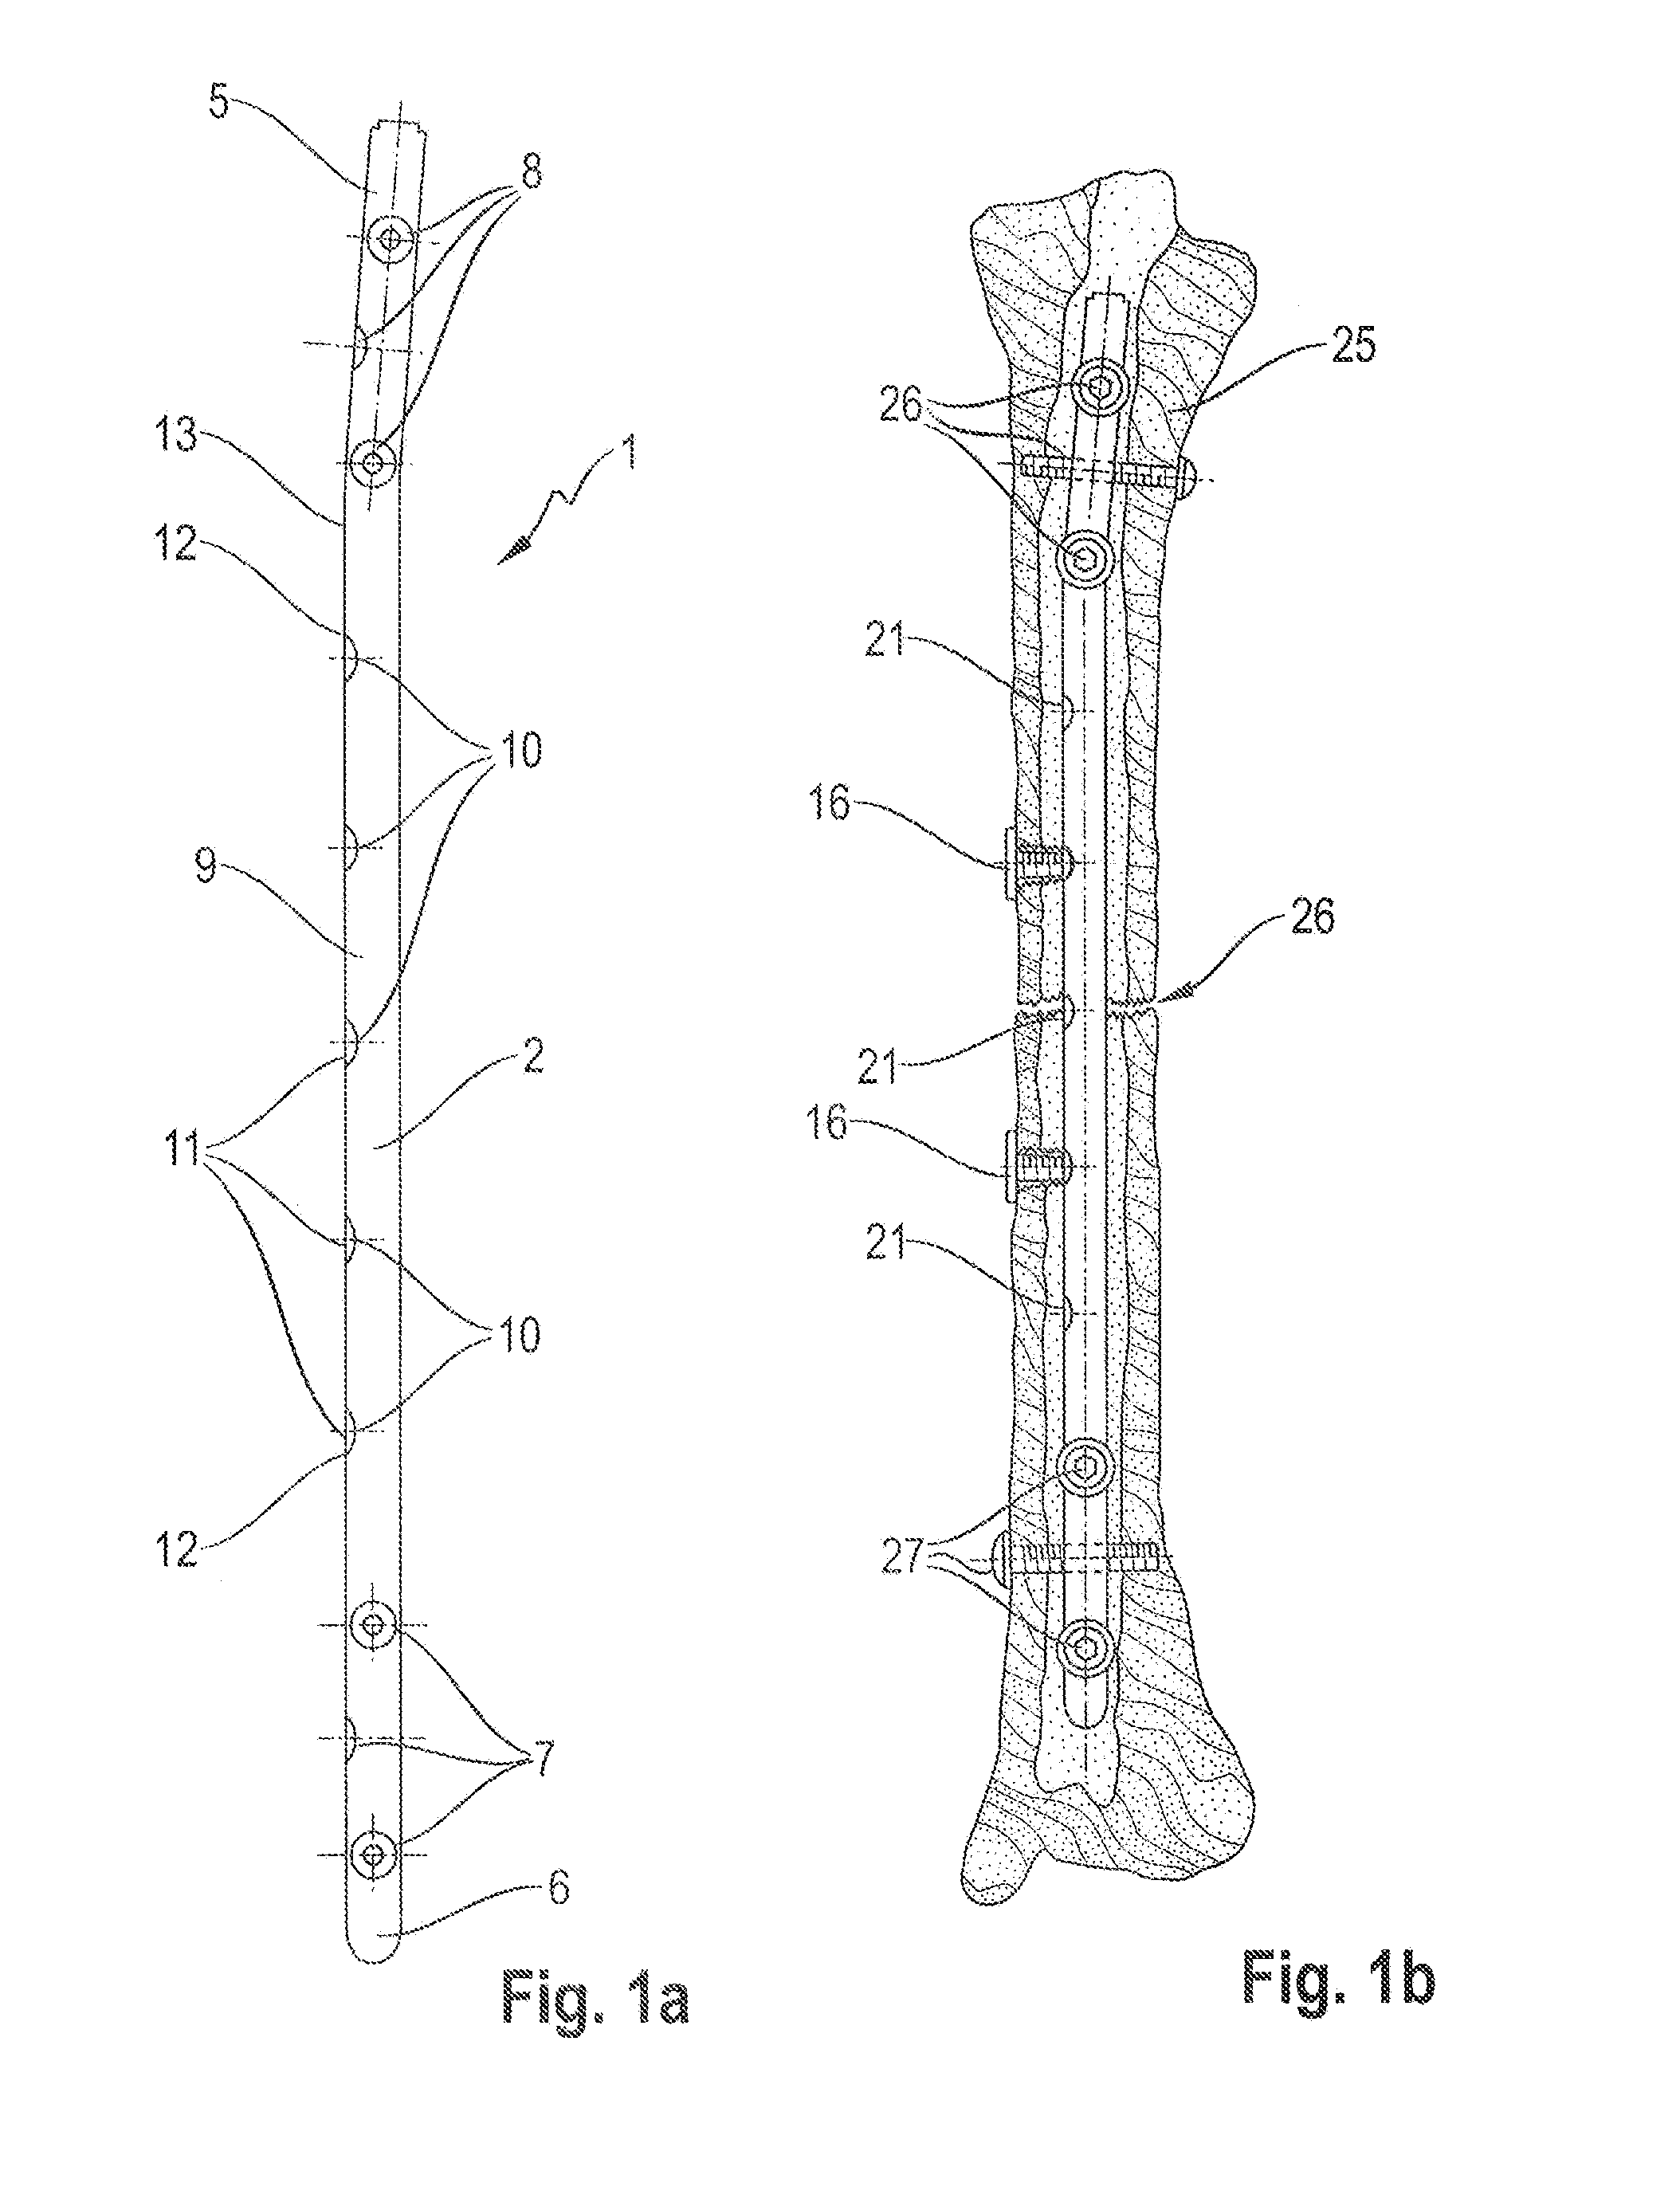 Osteosynthesis system for the multidirectional, angular-stable treatment of fractures of tubular bones comprising an intramedullary nail and bone screws